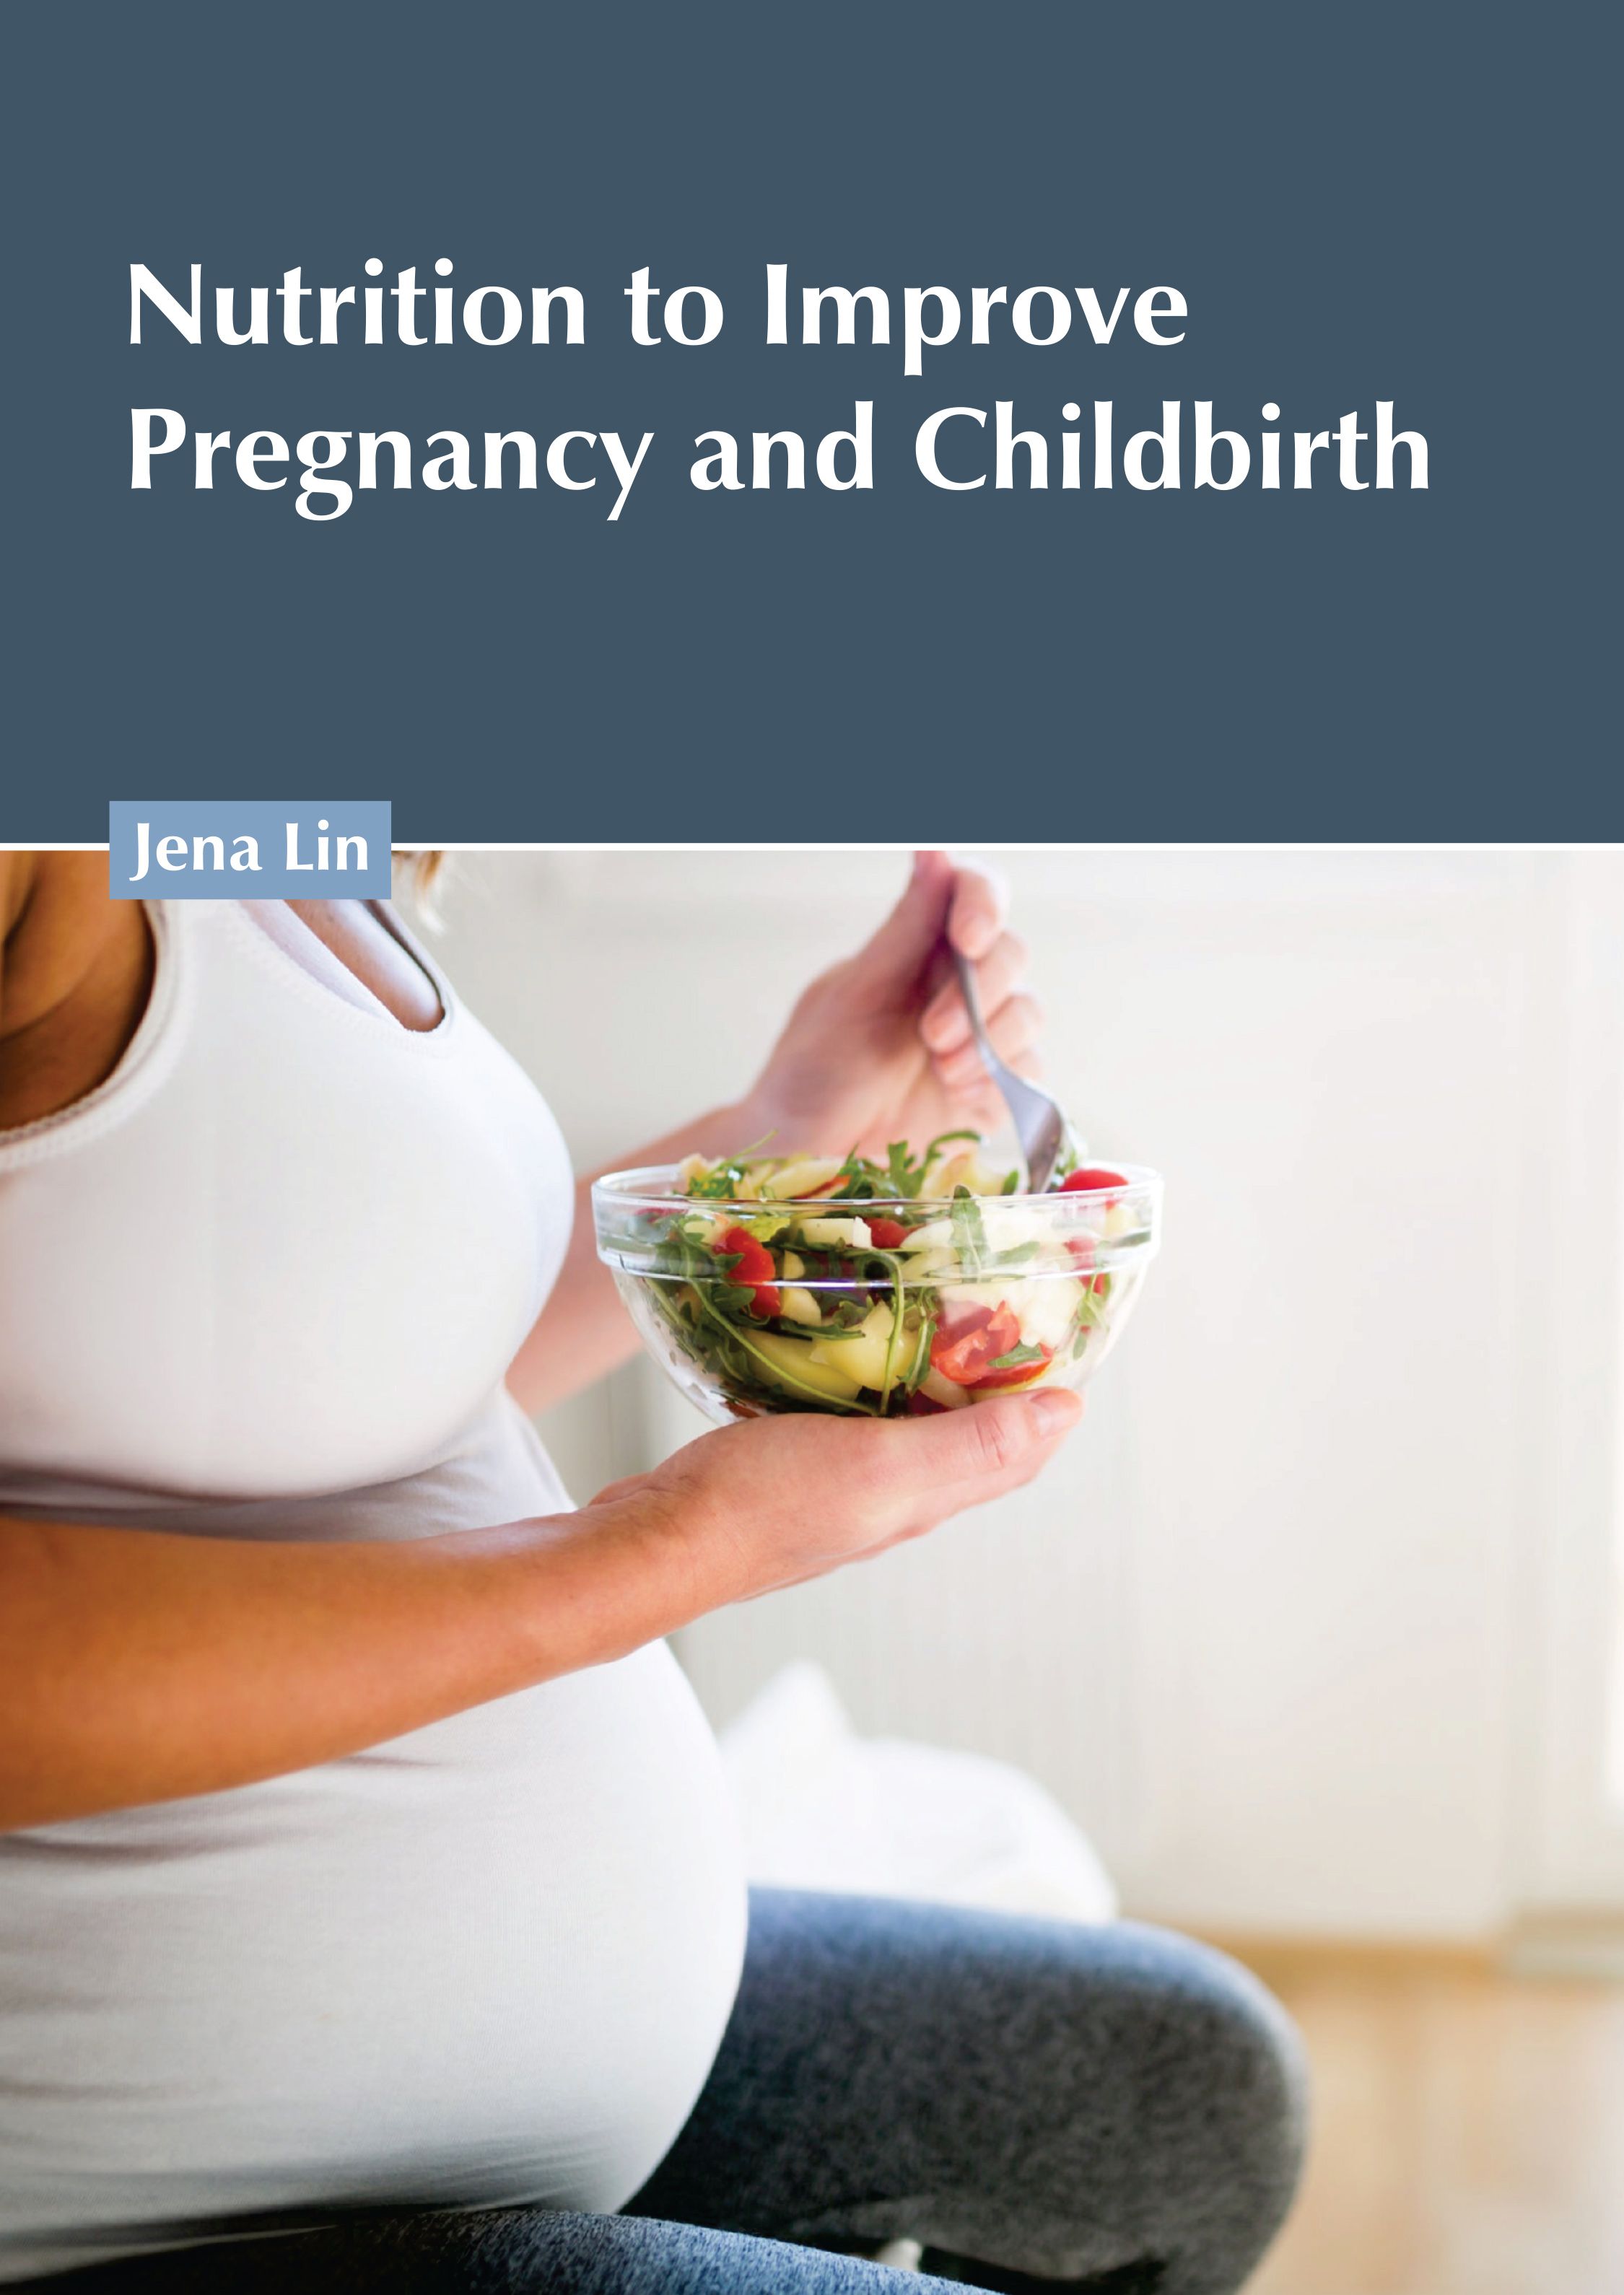 NUTRITION TO IMPROVE PREGNANCY AND CHILDBIRTH